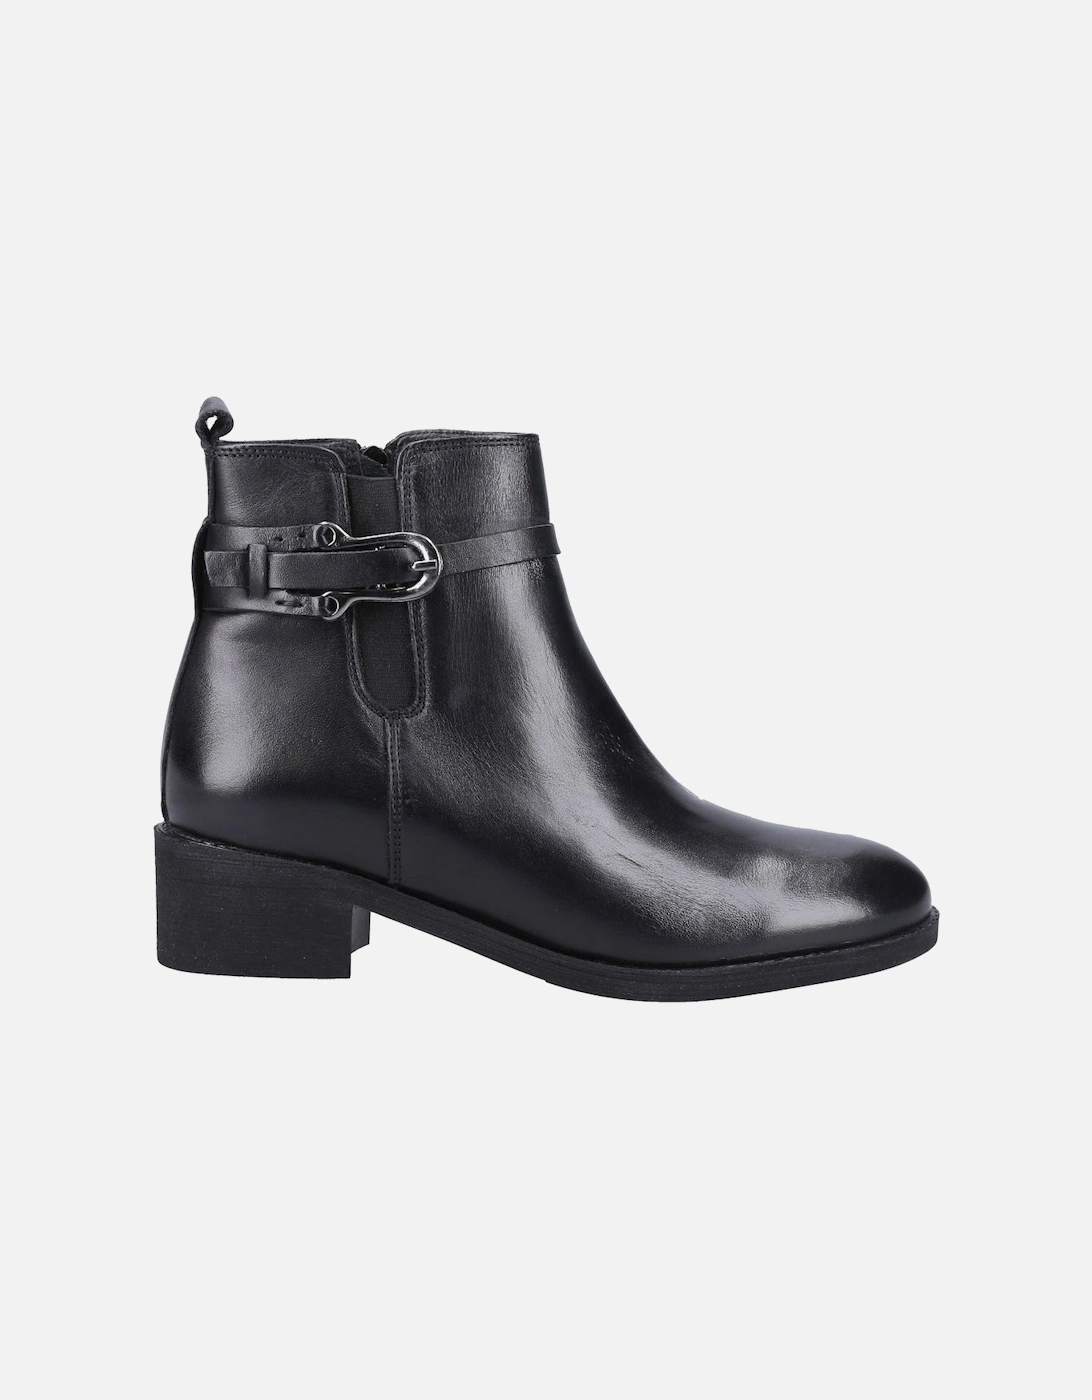 Emily Womens Ankle Boots